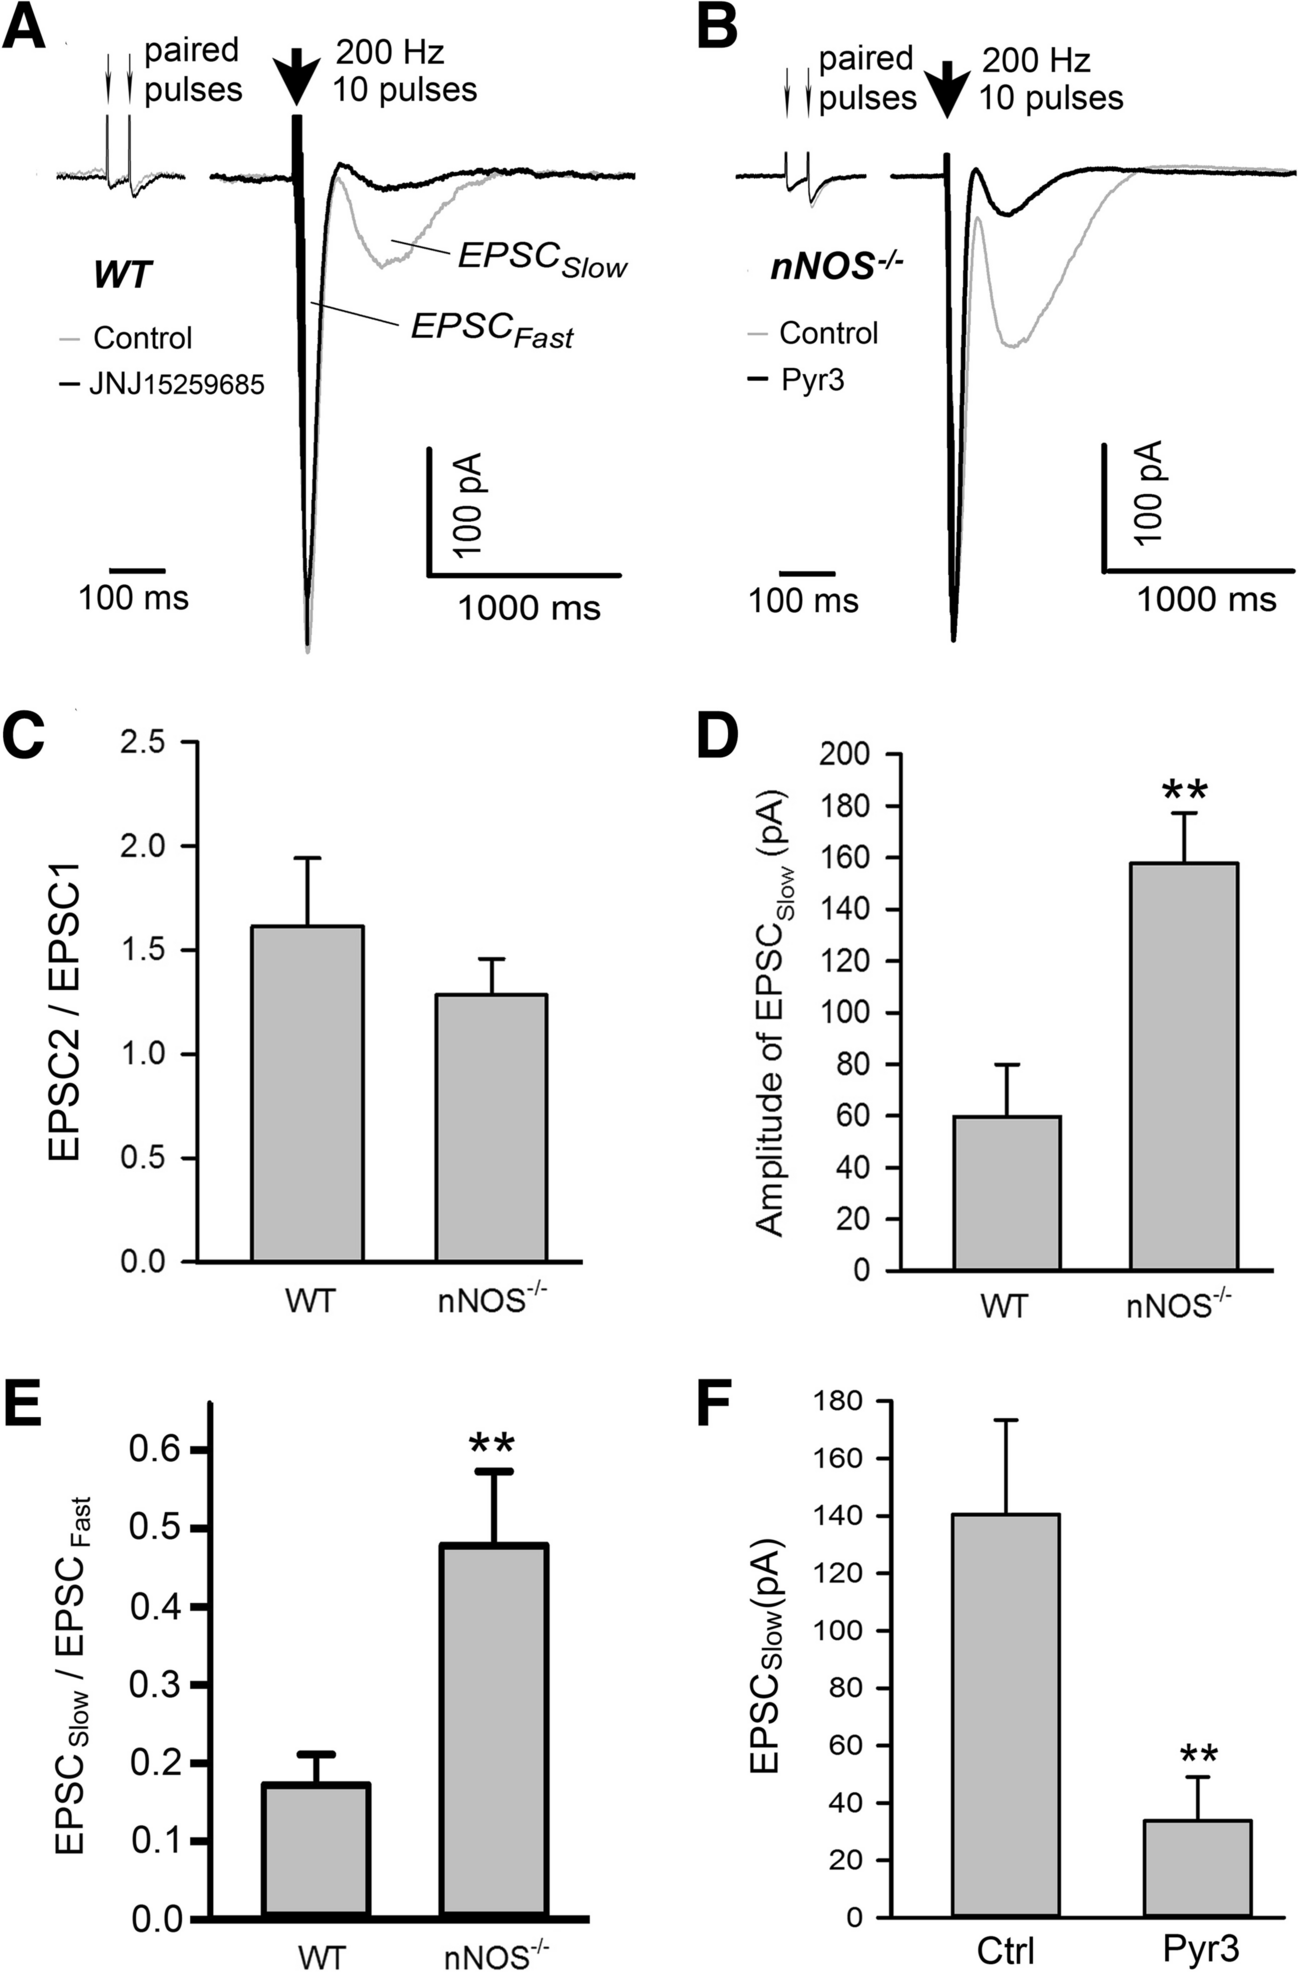 Neuronal Nitric Oxide Synthase Regulates Cerebellar Parallel Fiber Slow EPSC in Purkinje Neurons by Modulating STIM1-Gated TRPC3-Containing Channels